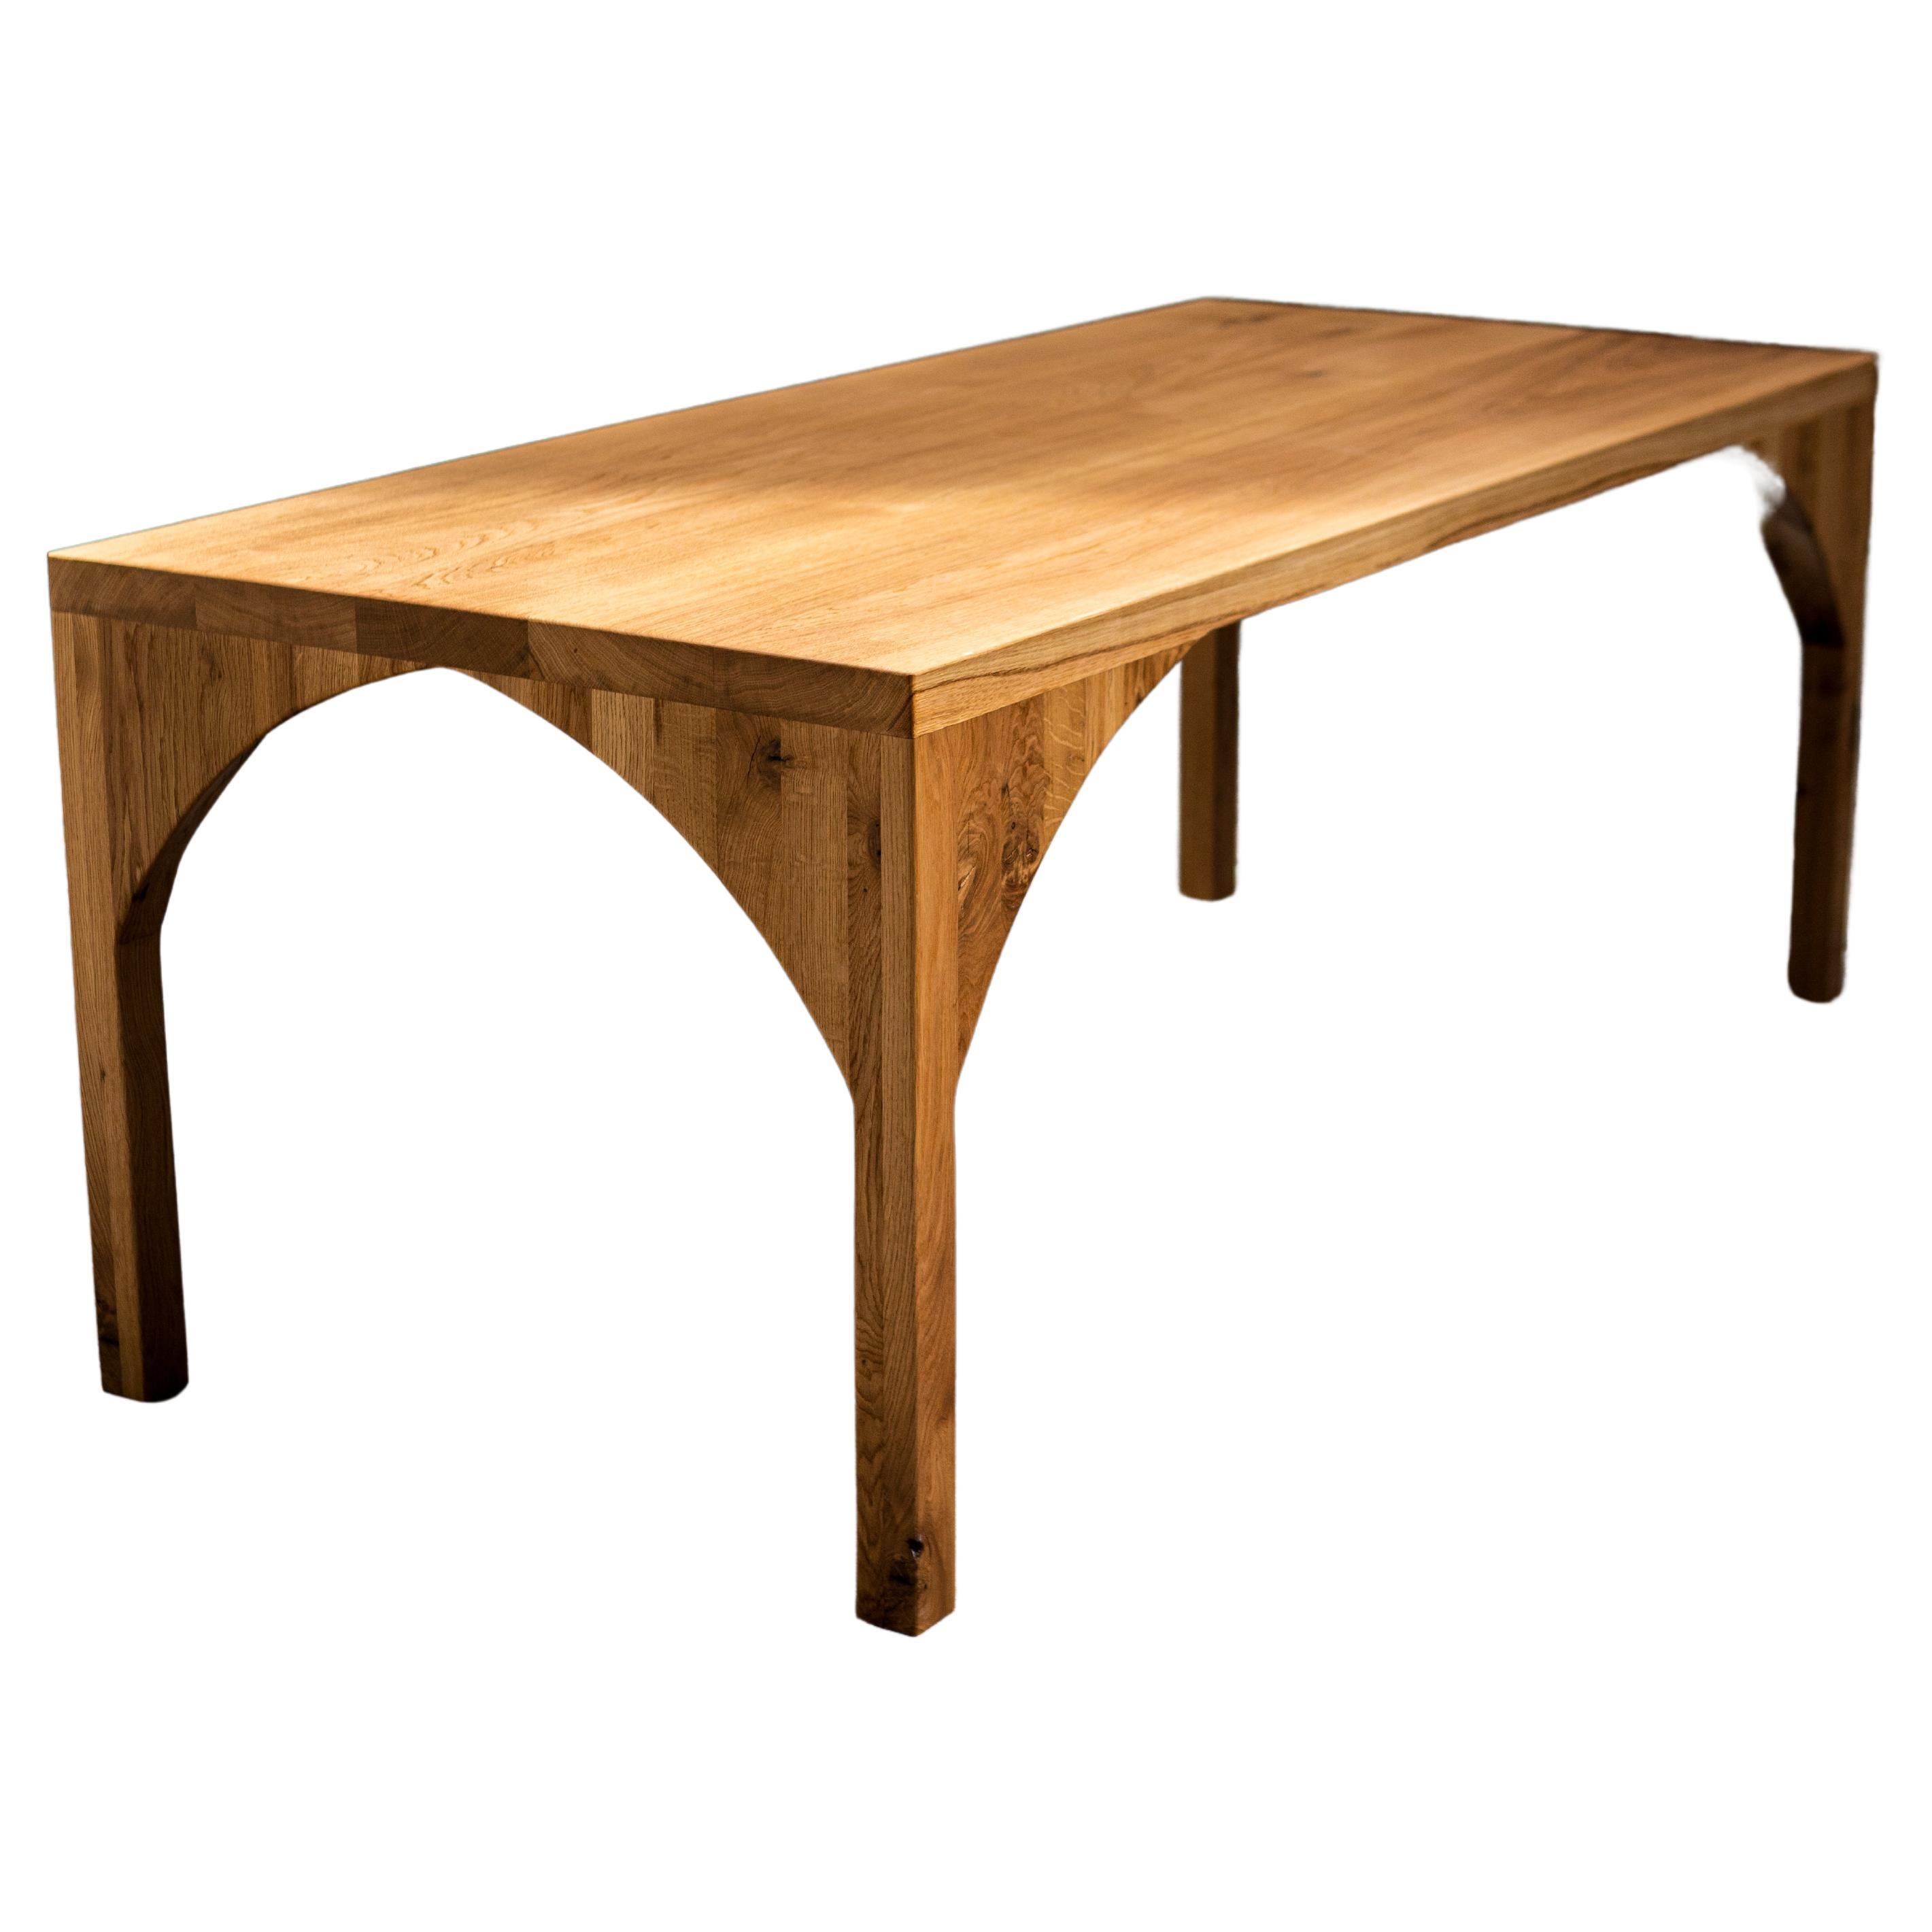 The Bamba Dining Table